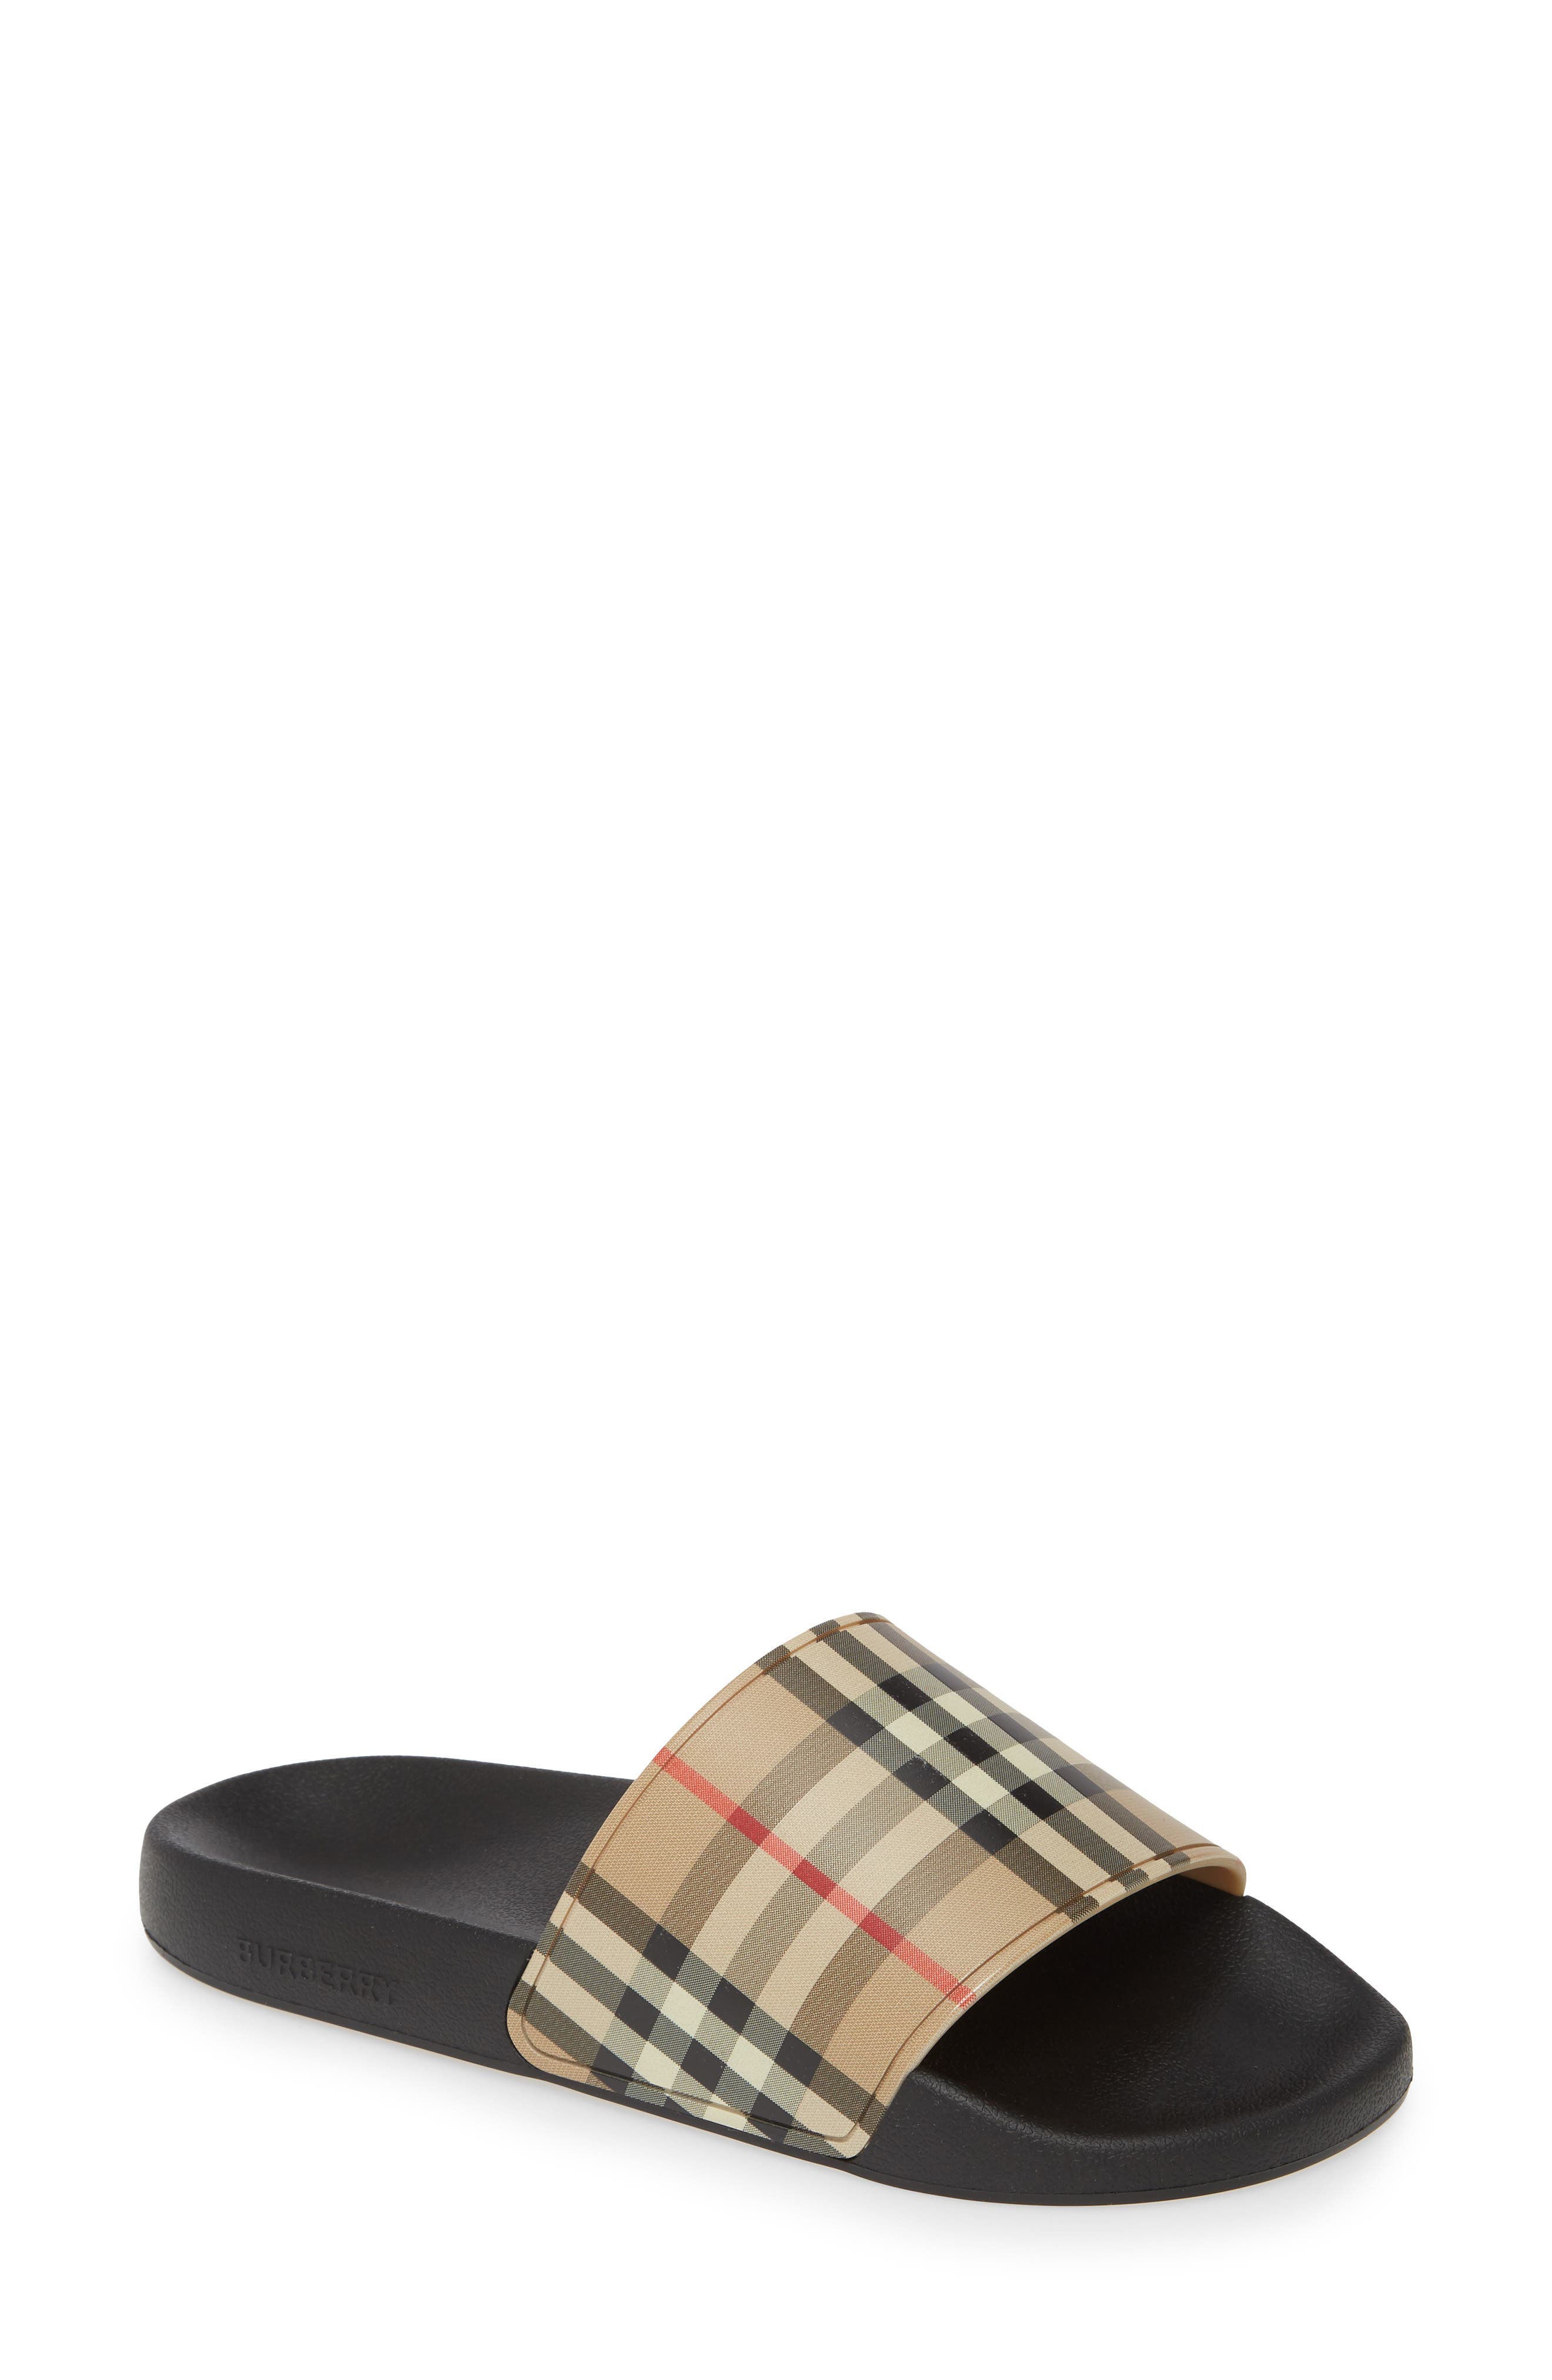 burberry mens shoes nordstrom